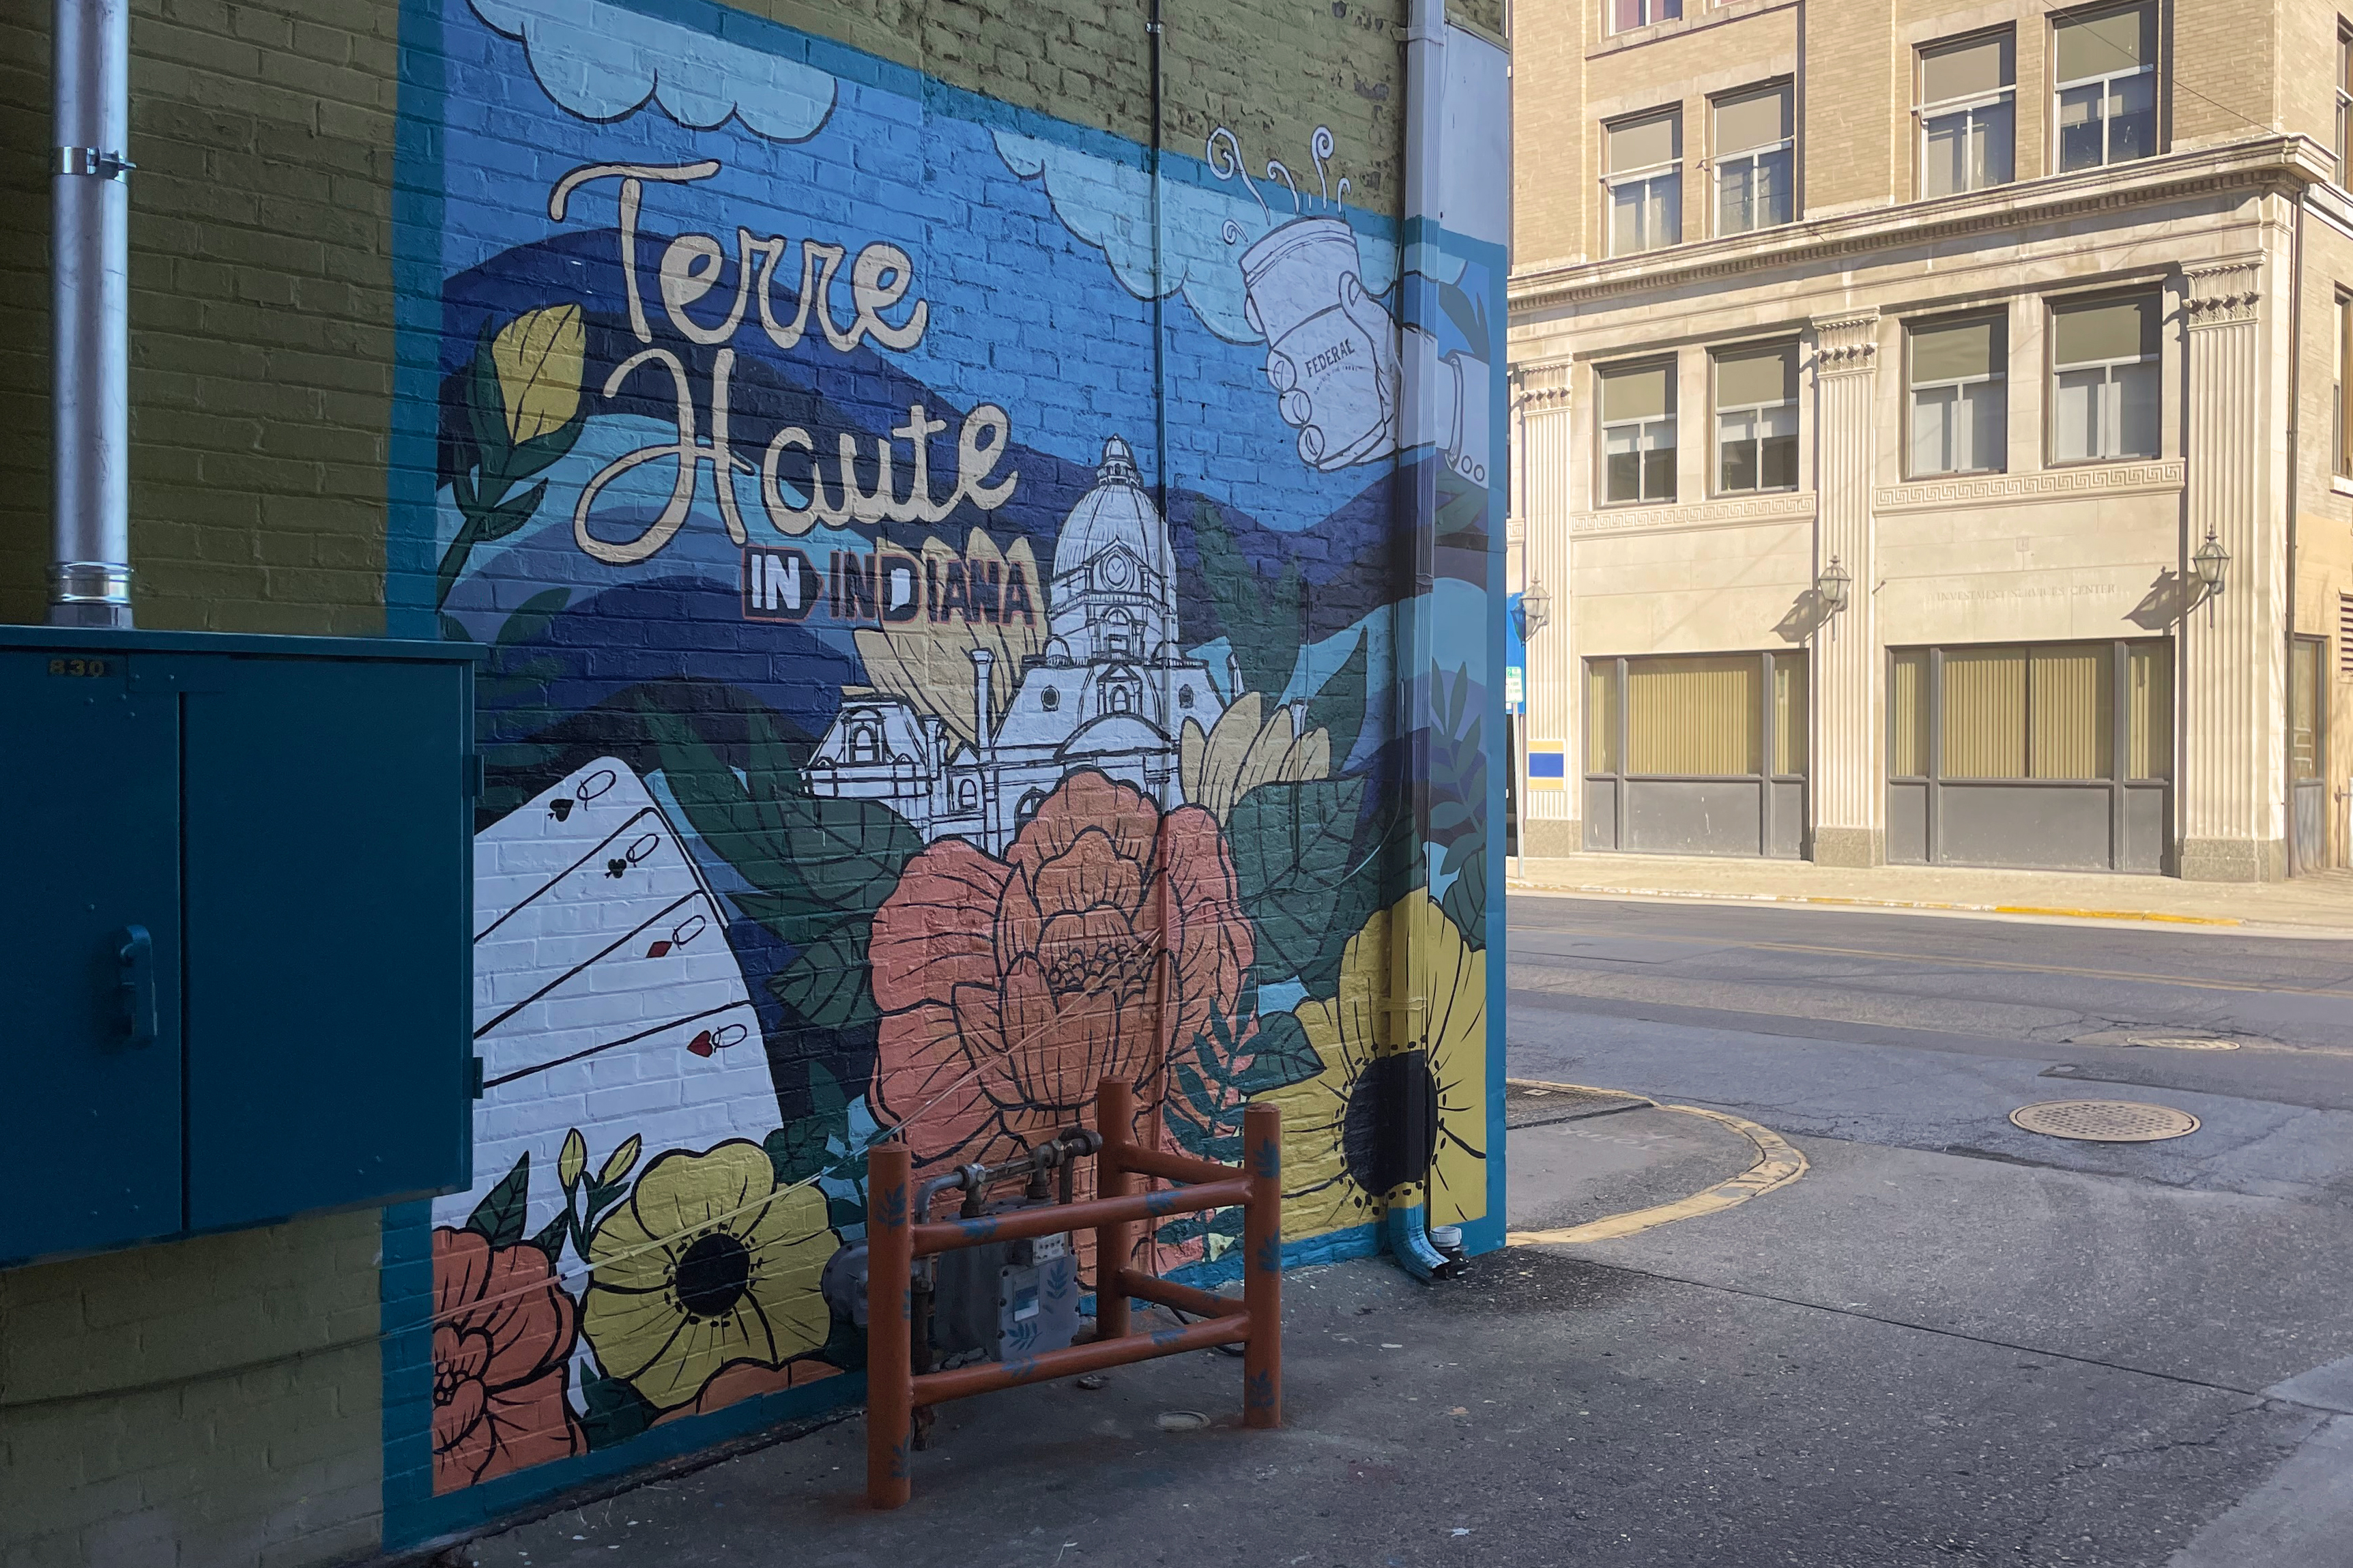 a mural on an outdoor wall that shows flowers and reads Terra Haute, Indiana